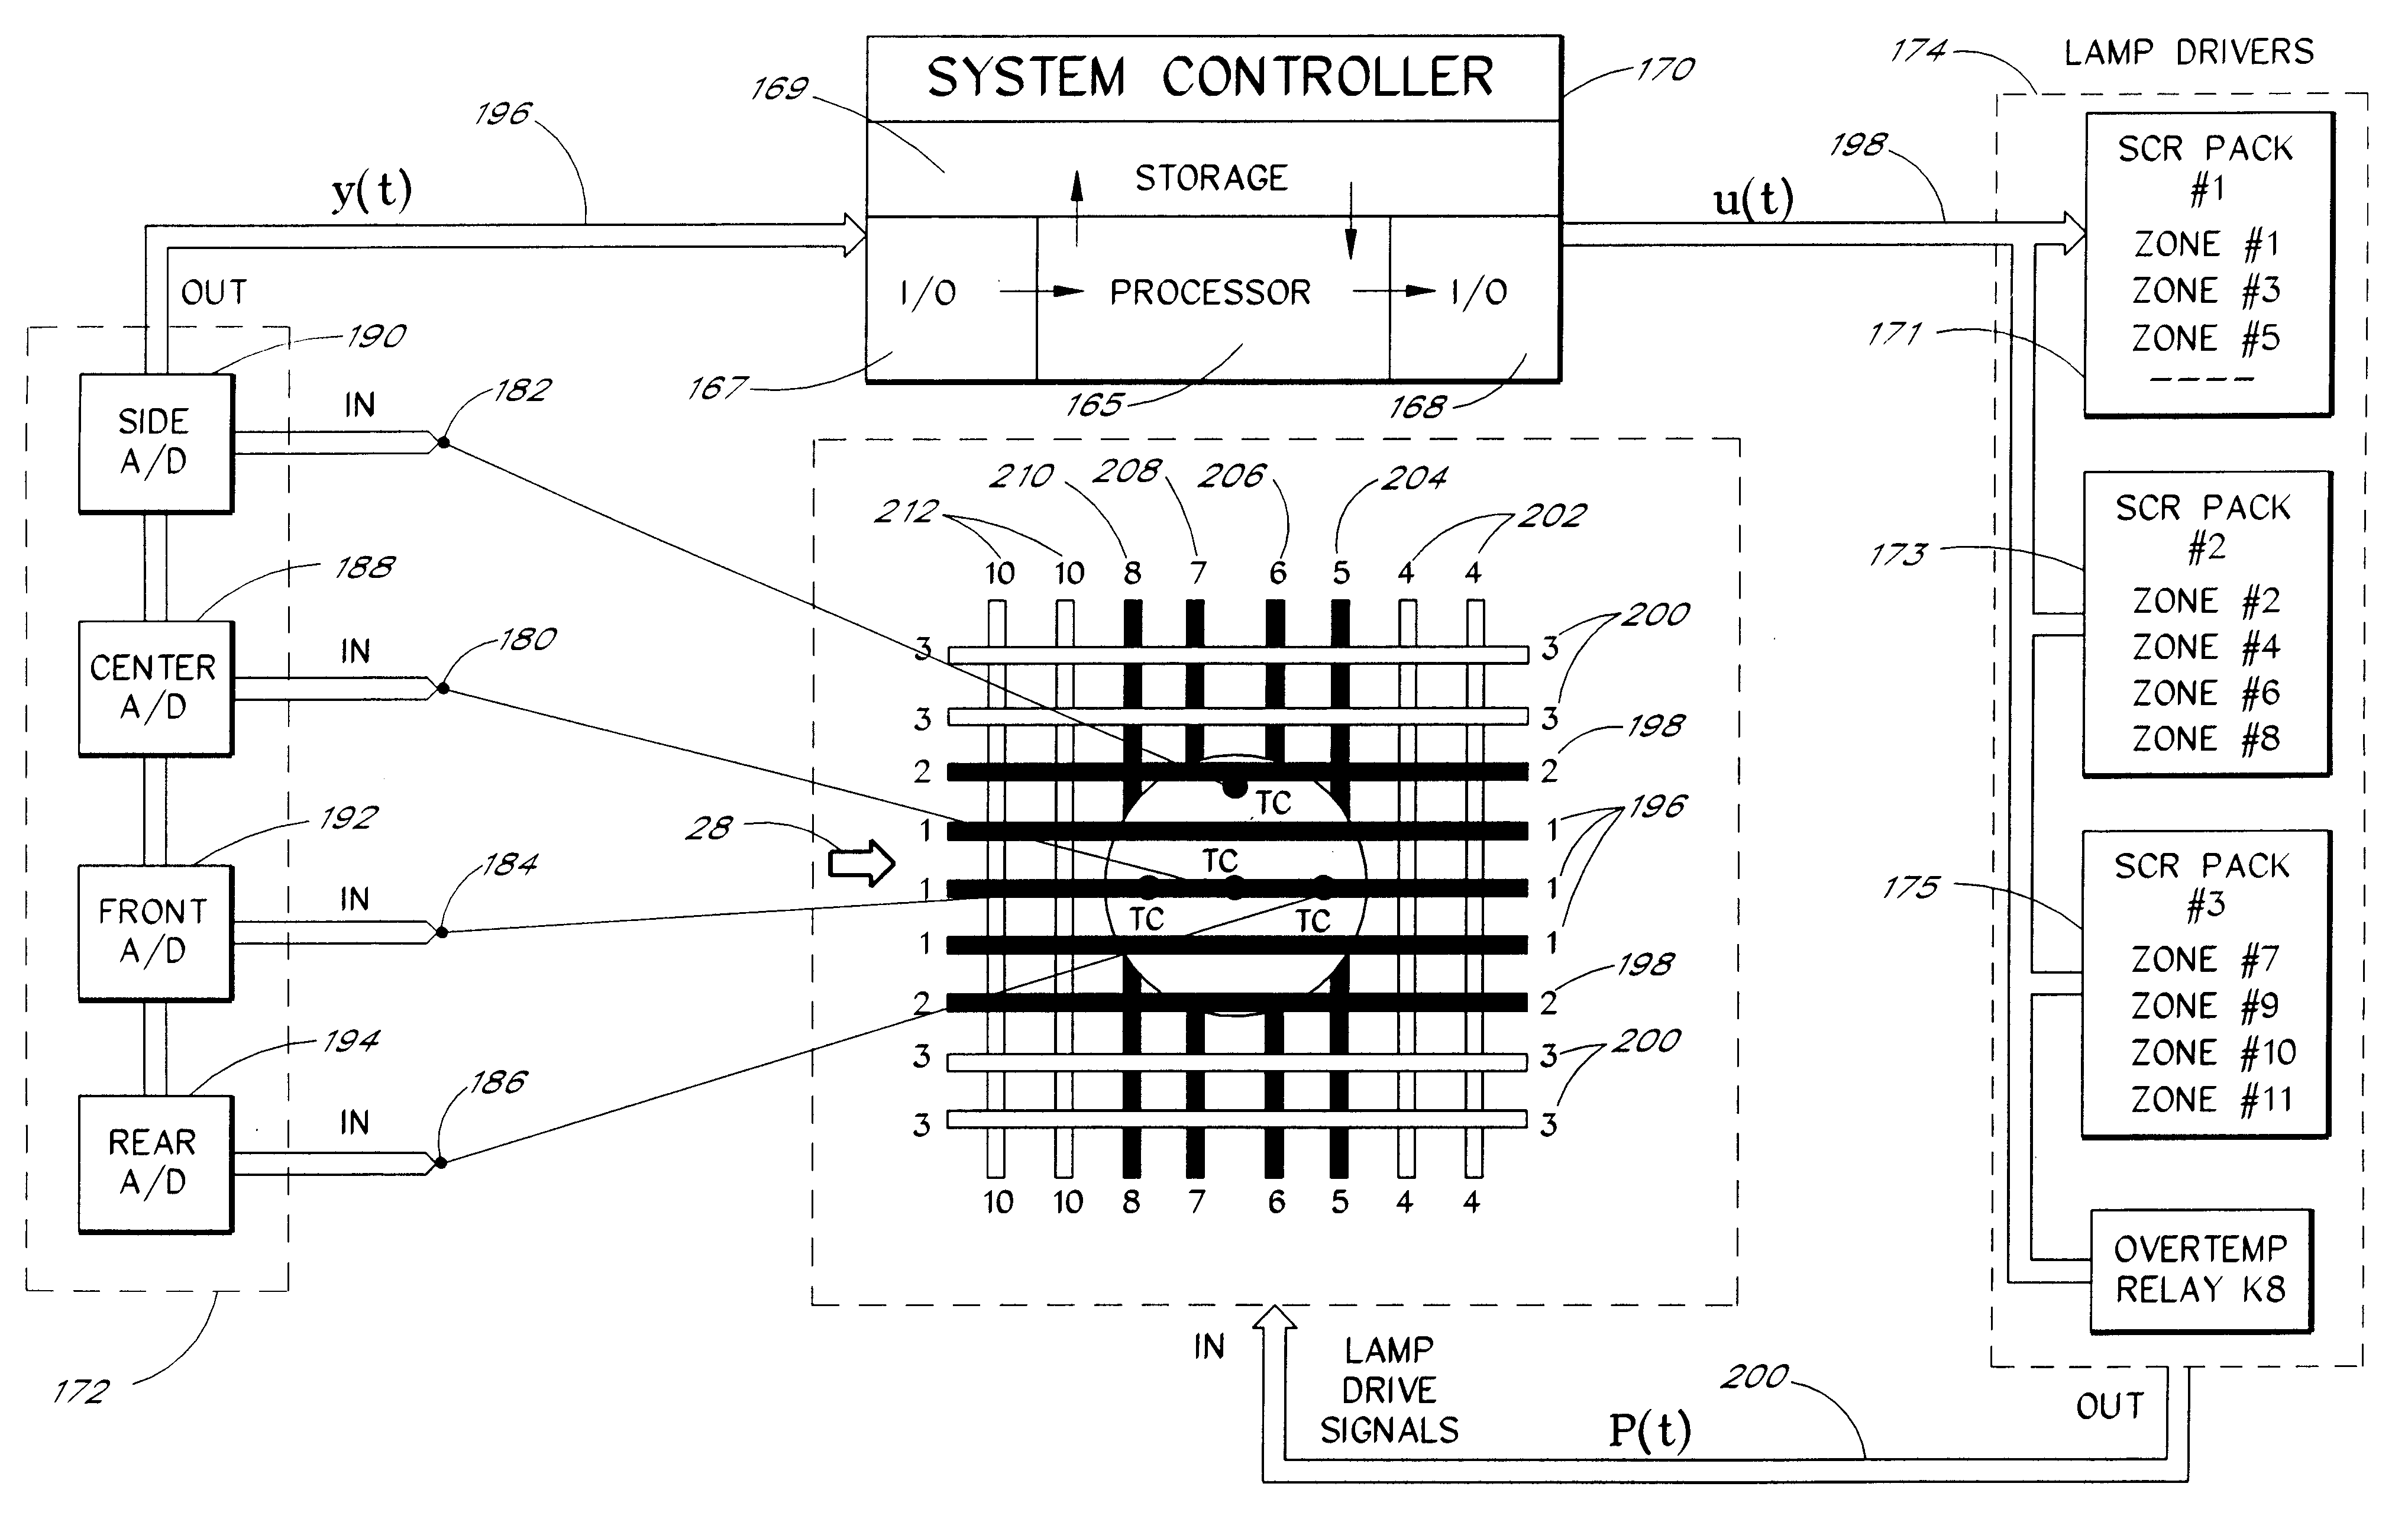 Model-based predictive control of thermal processing